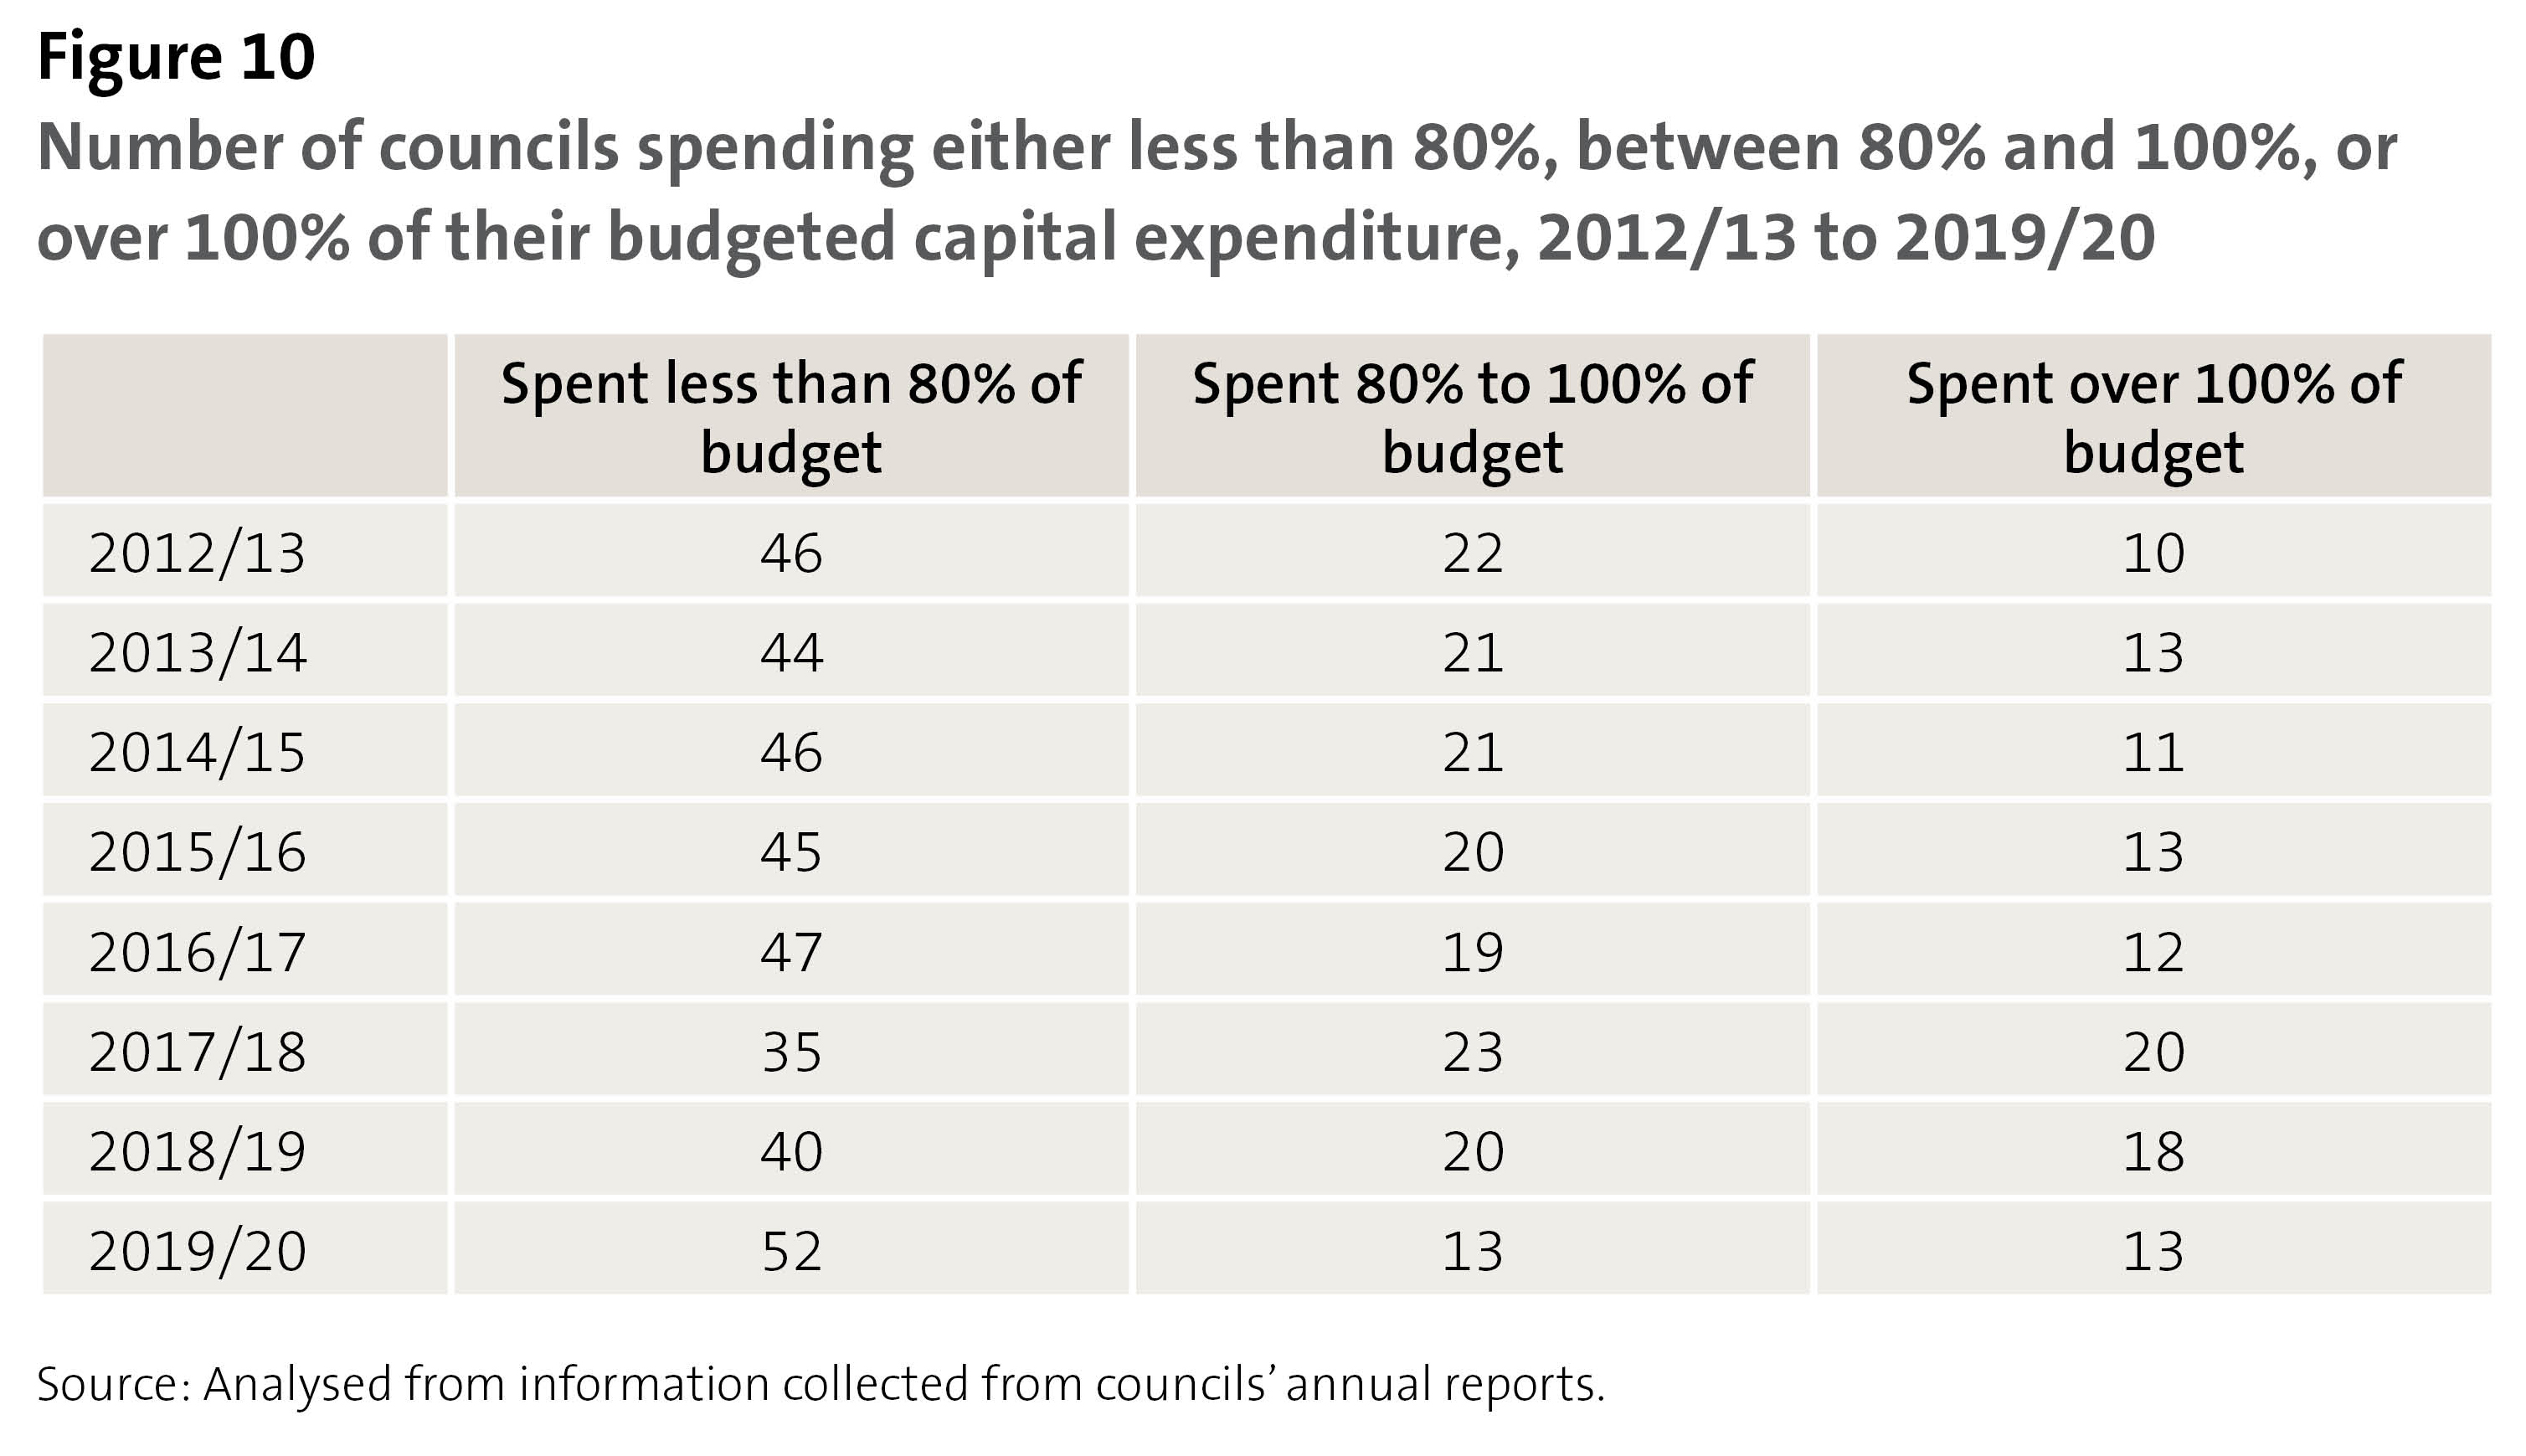 Figure 10  Number of councils spending either less than 80%, between 80% and 100%, or over 100% of their budgeted capital expenditure, 2012/13 to 2019/20